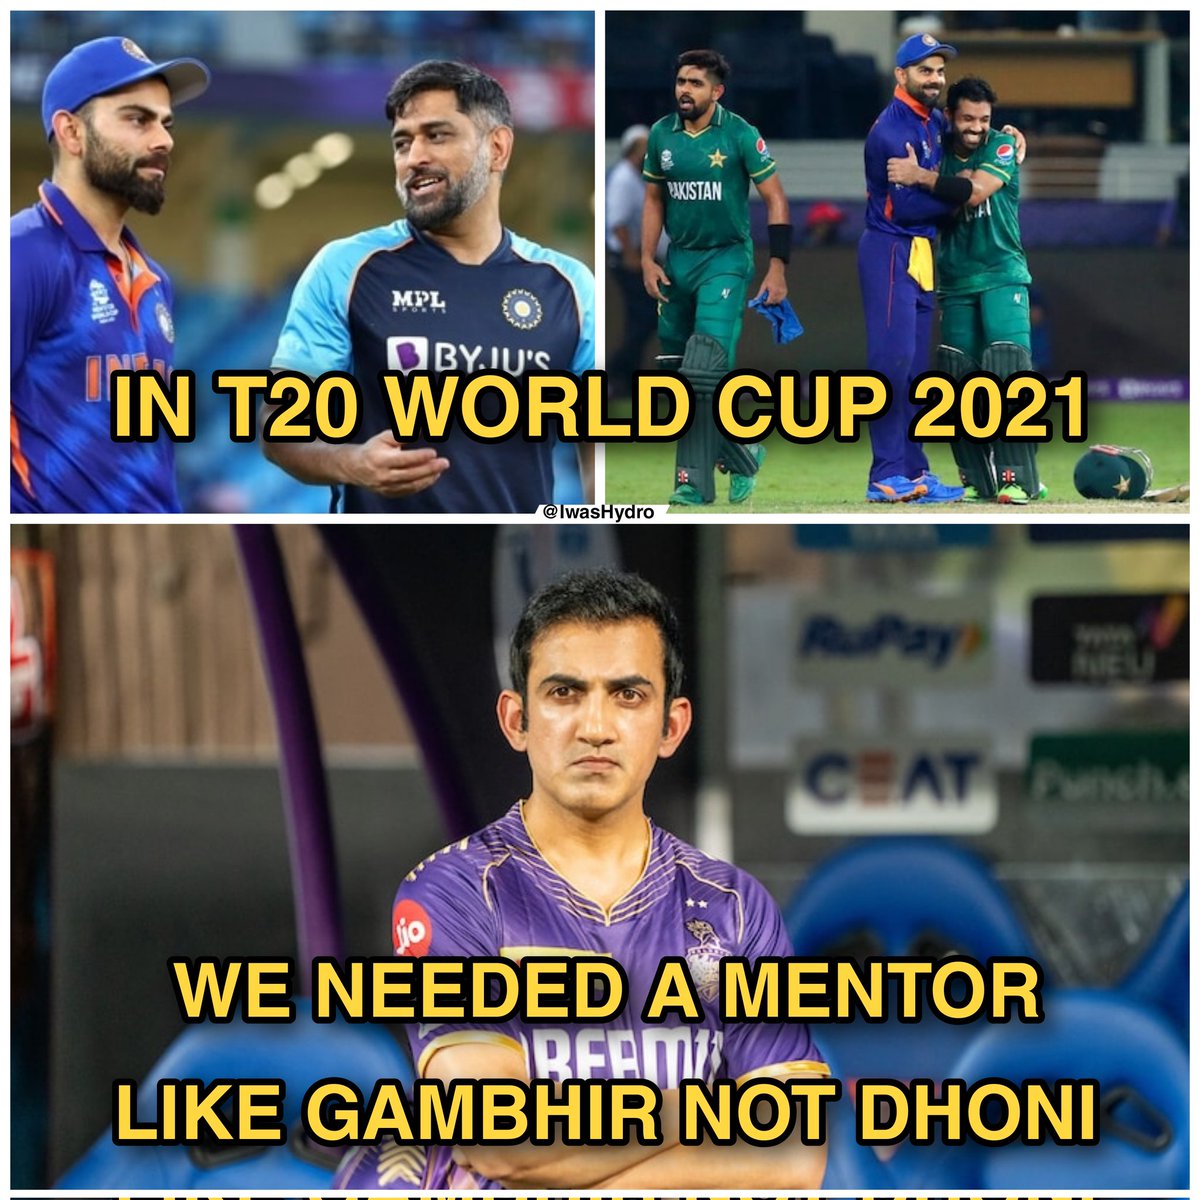 Gambhir would have won that T20WC.💔